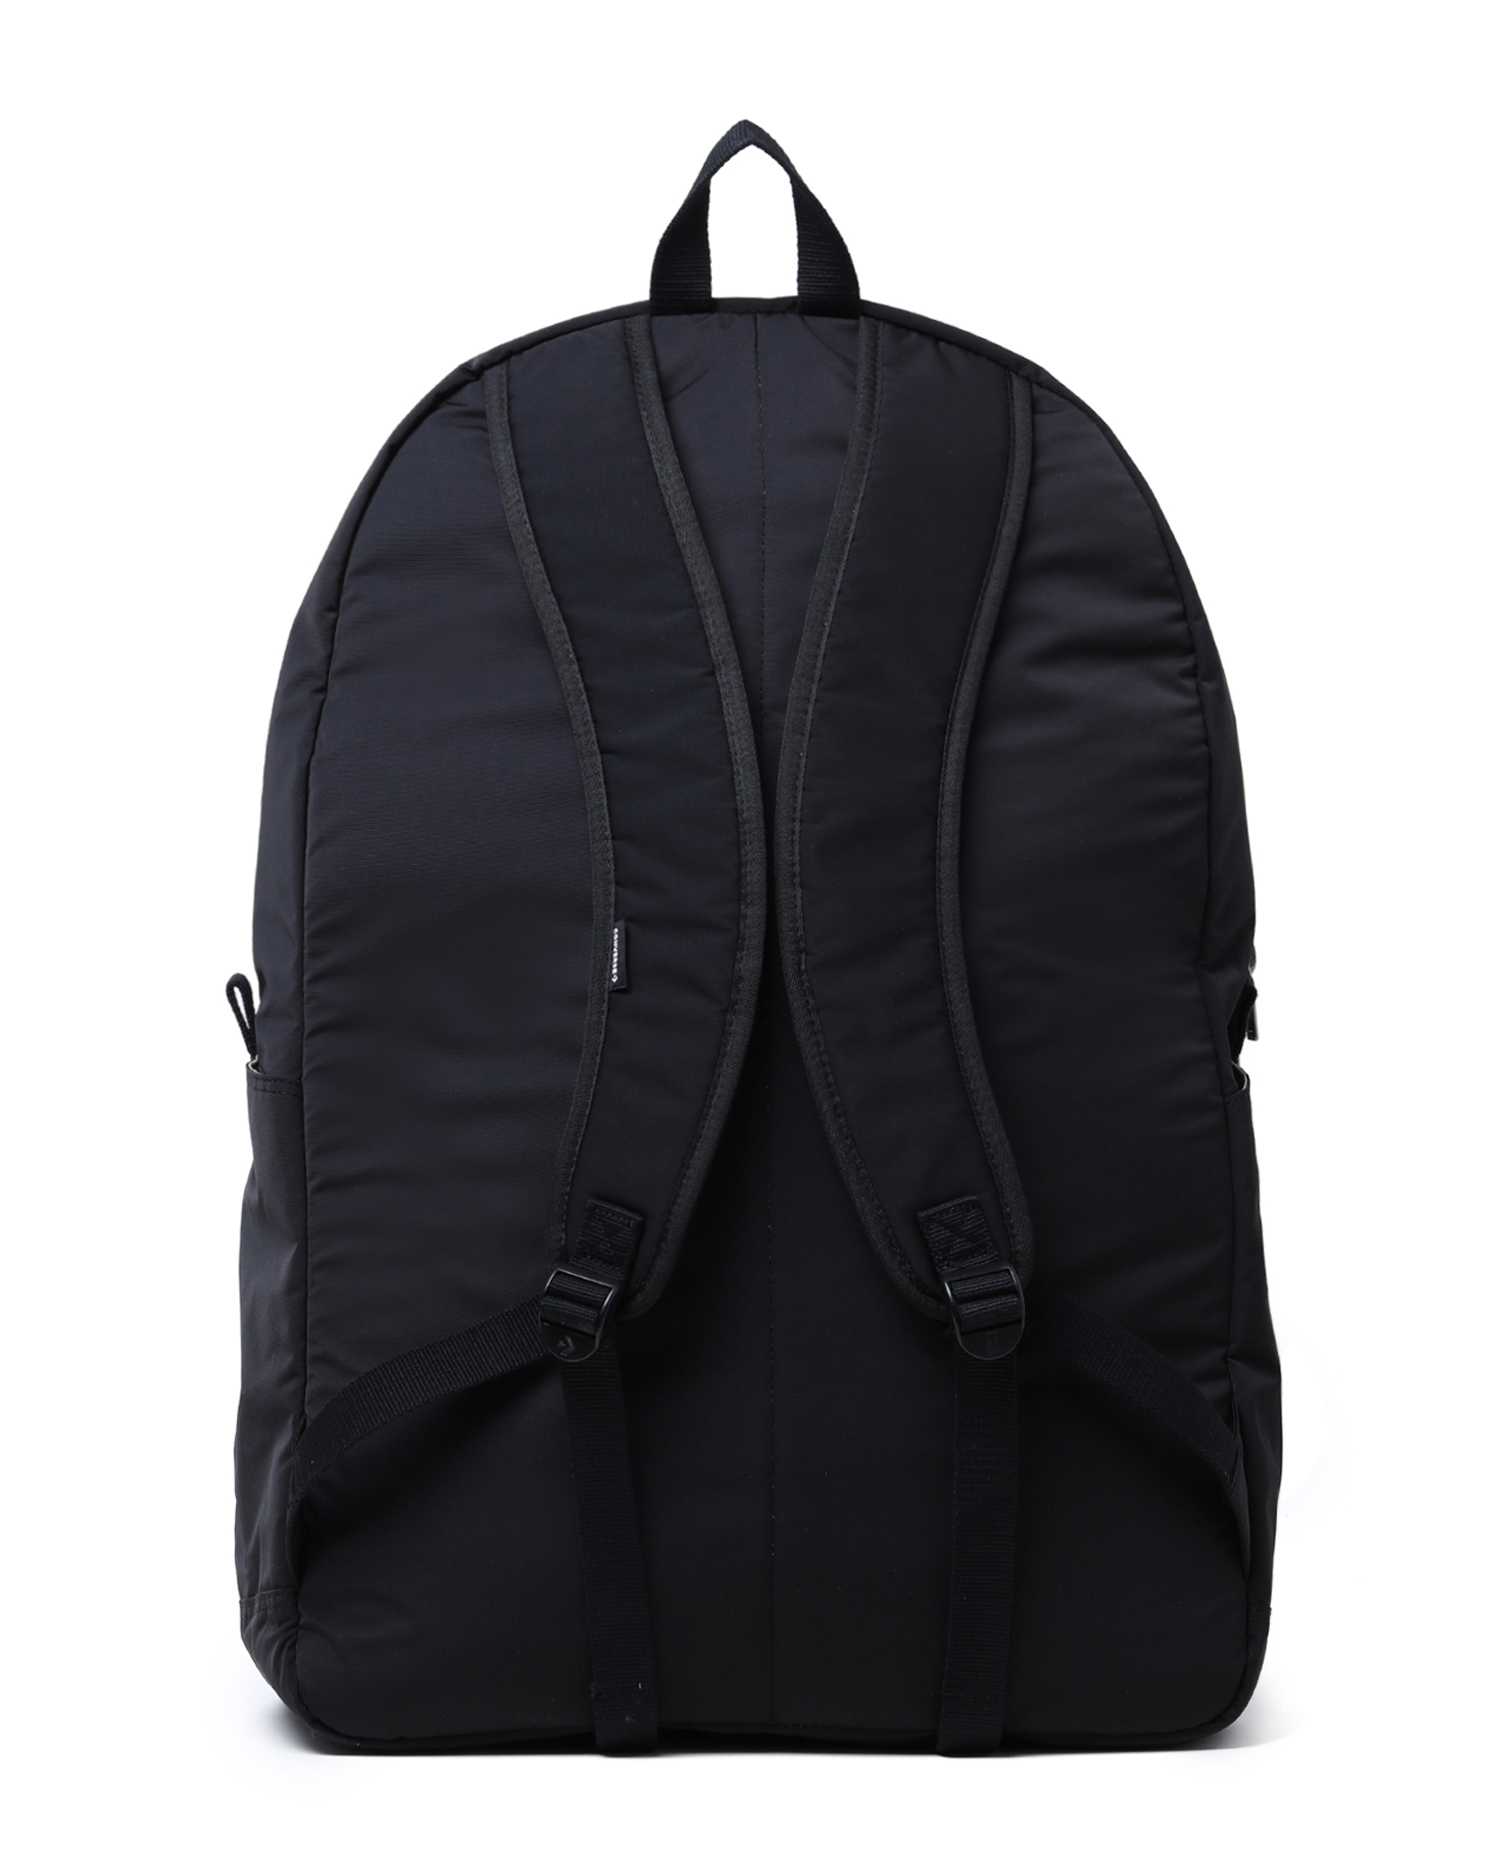 DRKSHDW X Converse oversized backpack| ITeSHOP